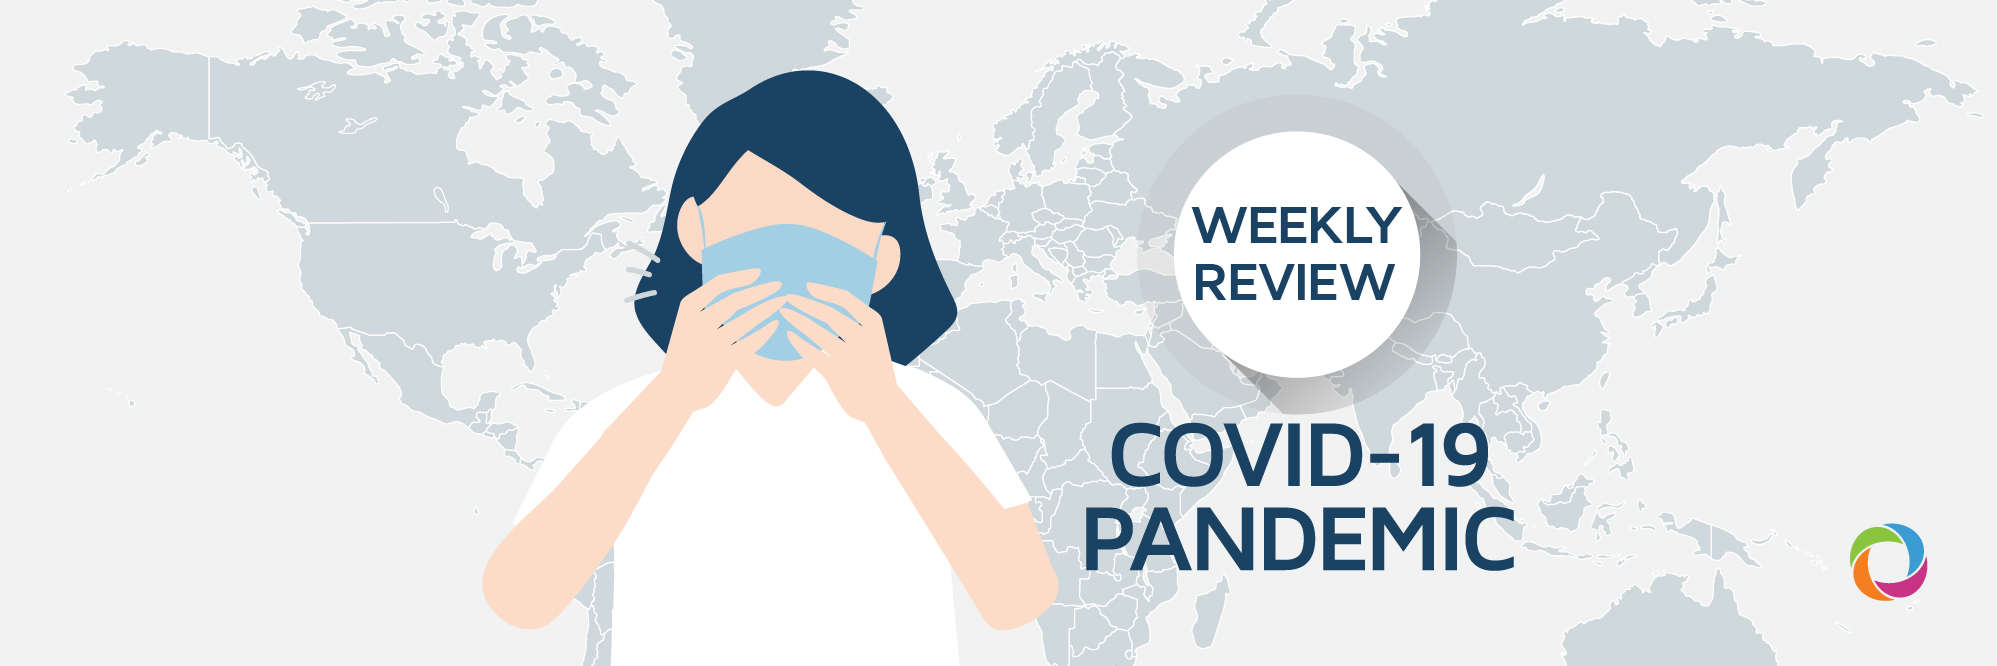 DevelopmentAid weekly review of the coronavirus situation across the world